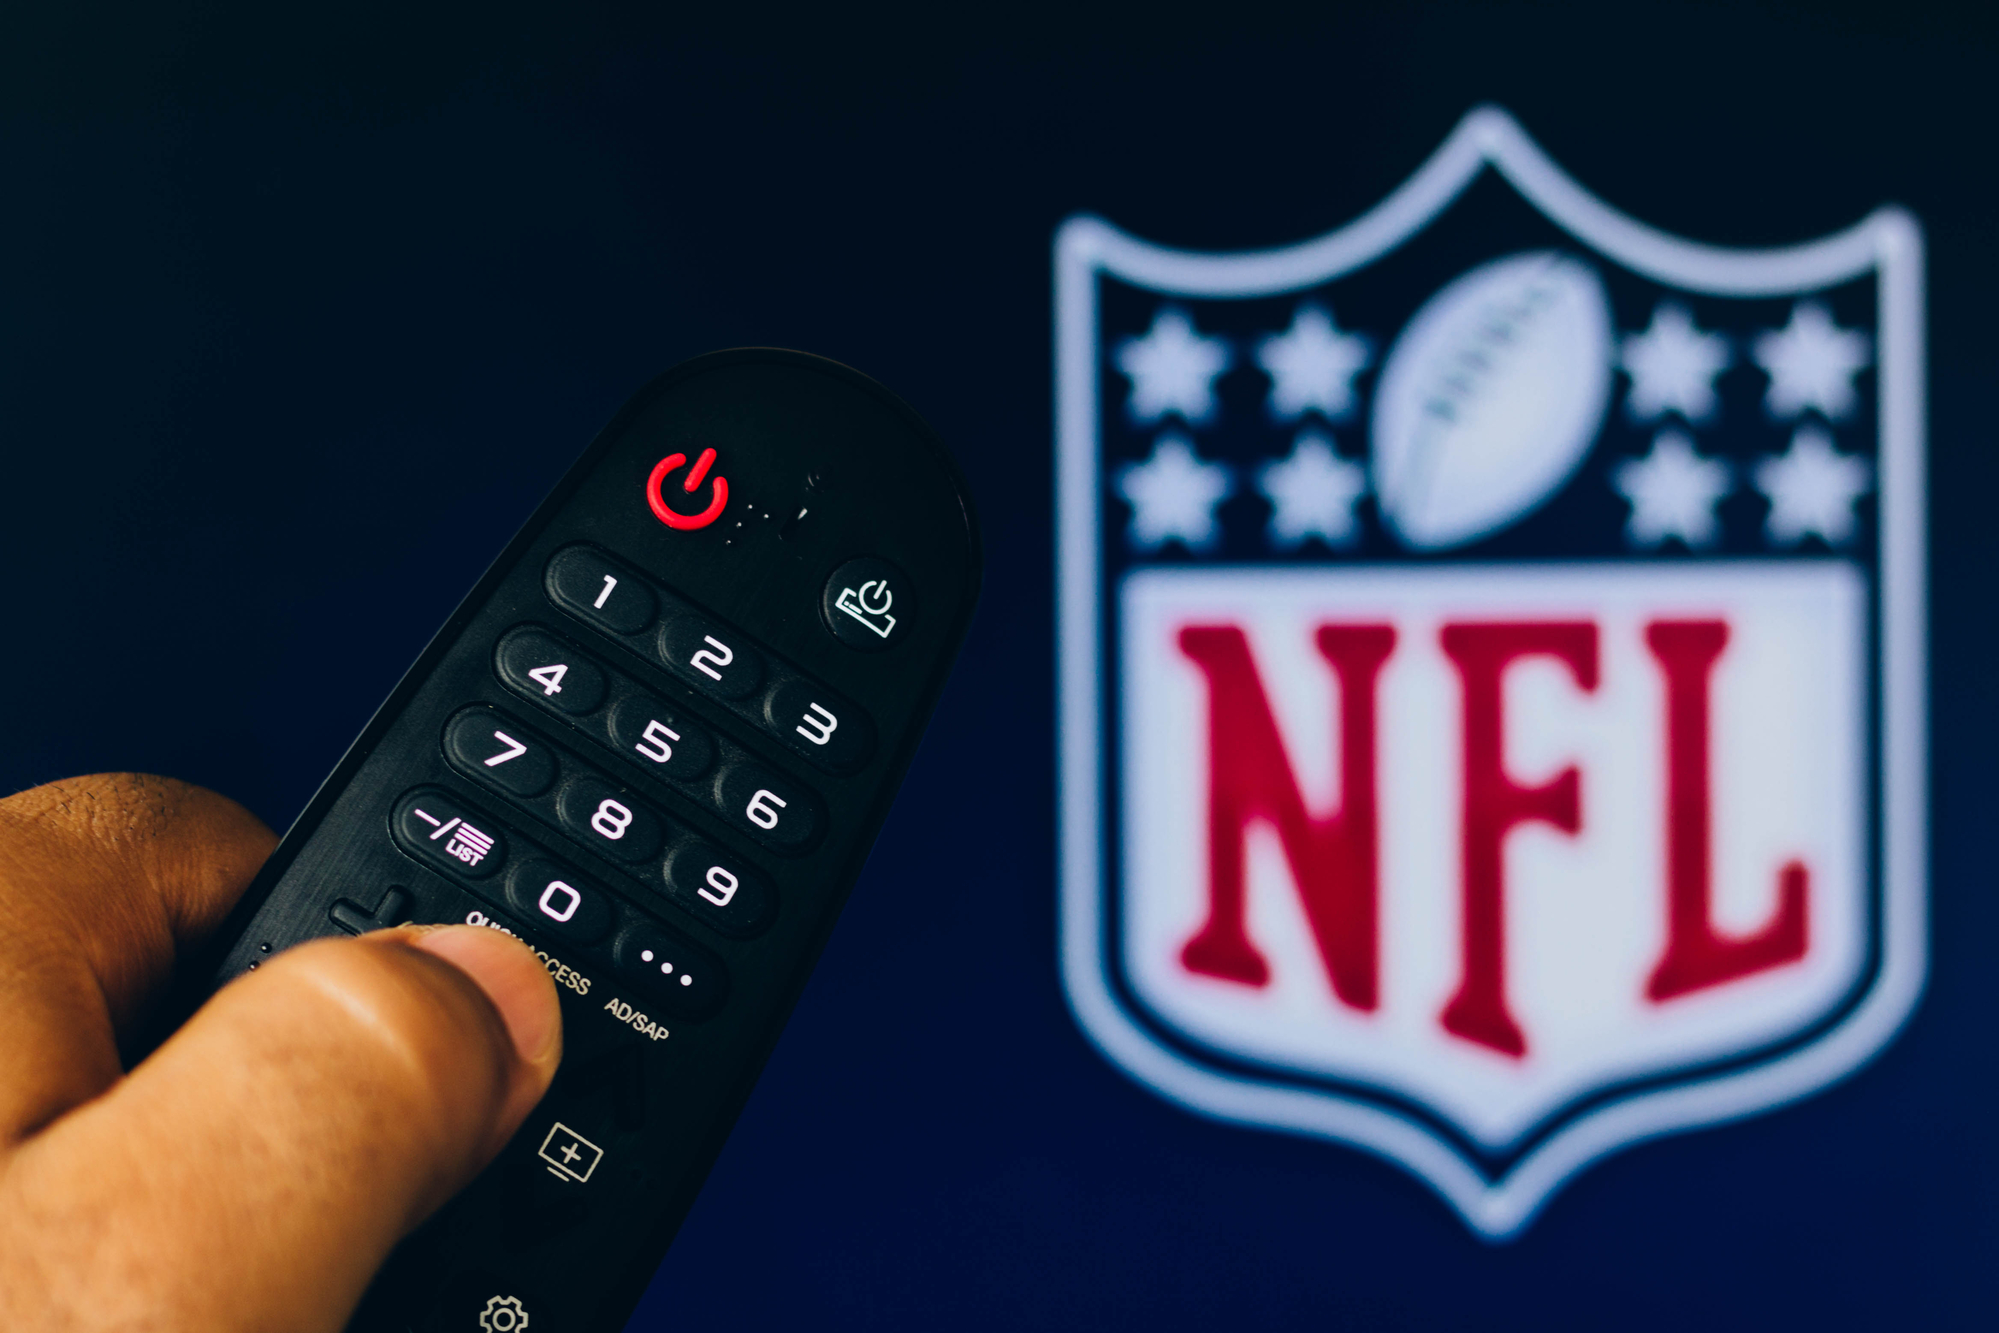 photograph of remote in hand with TV in background displaying NFL logo on screen